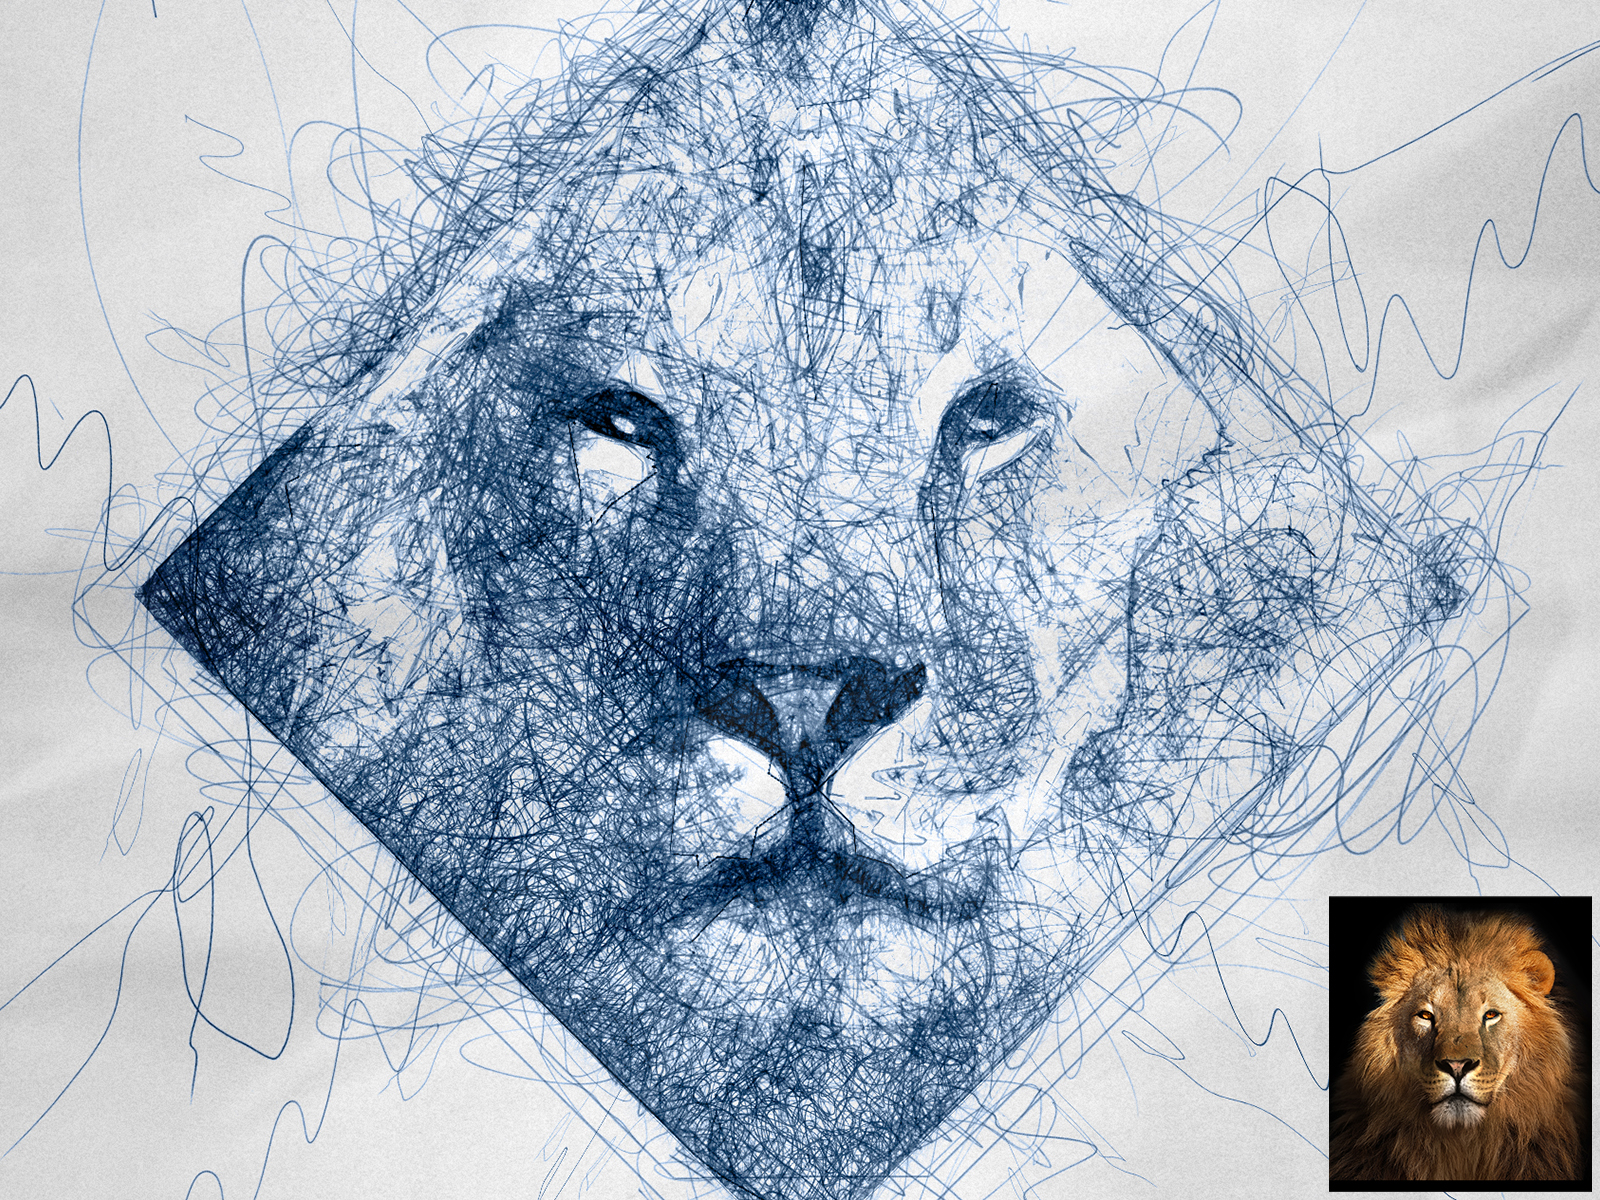 Buy Sketches Drawing Pen Arts Lion Online @ ₹480 from ShopClues